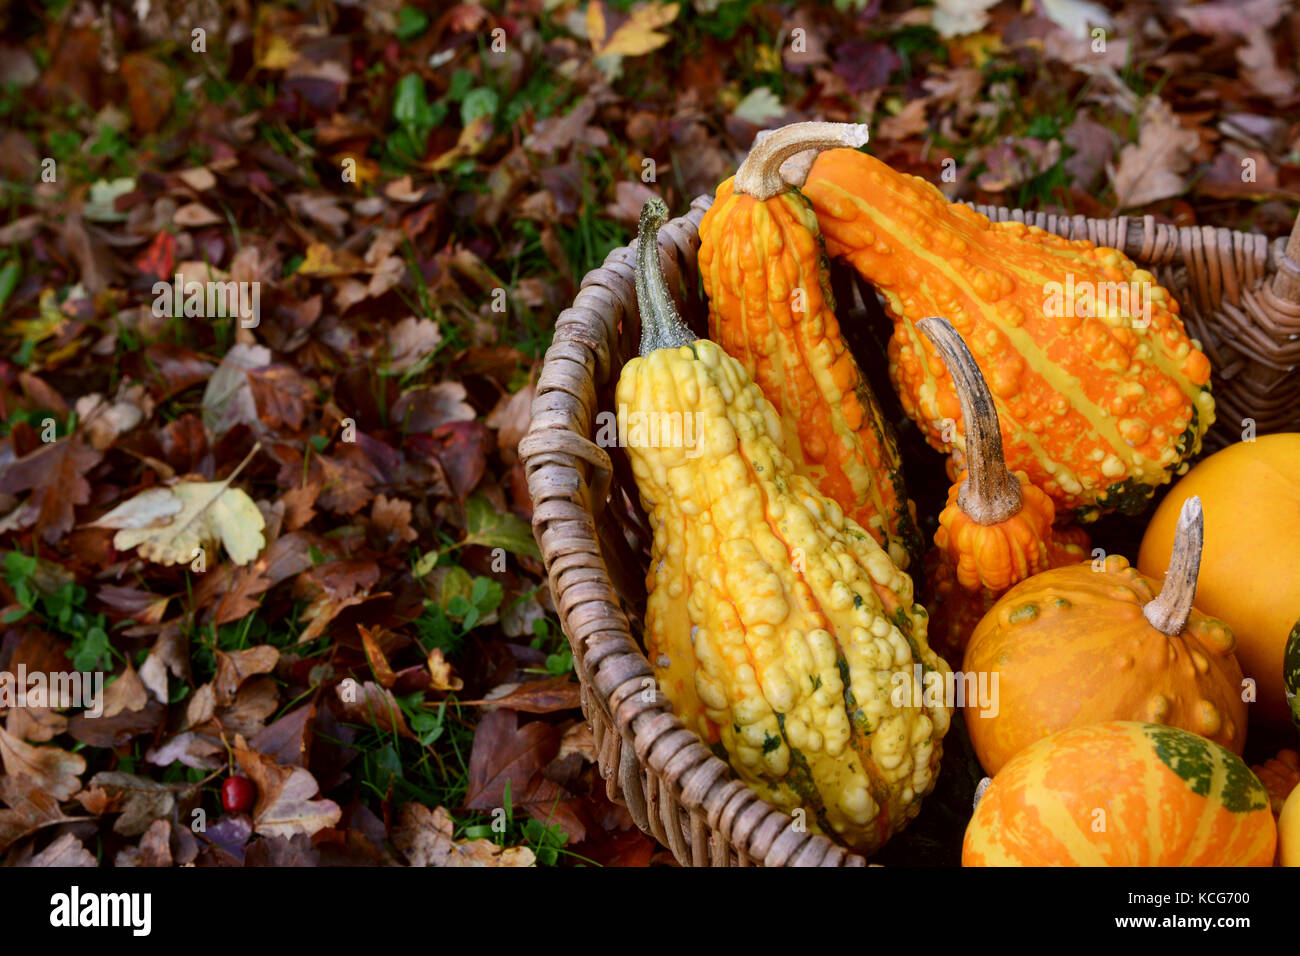 Detail of warty ornamental gourds in a basket on red and brown fall leaves Stock Photo